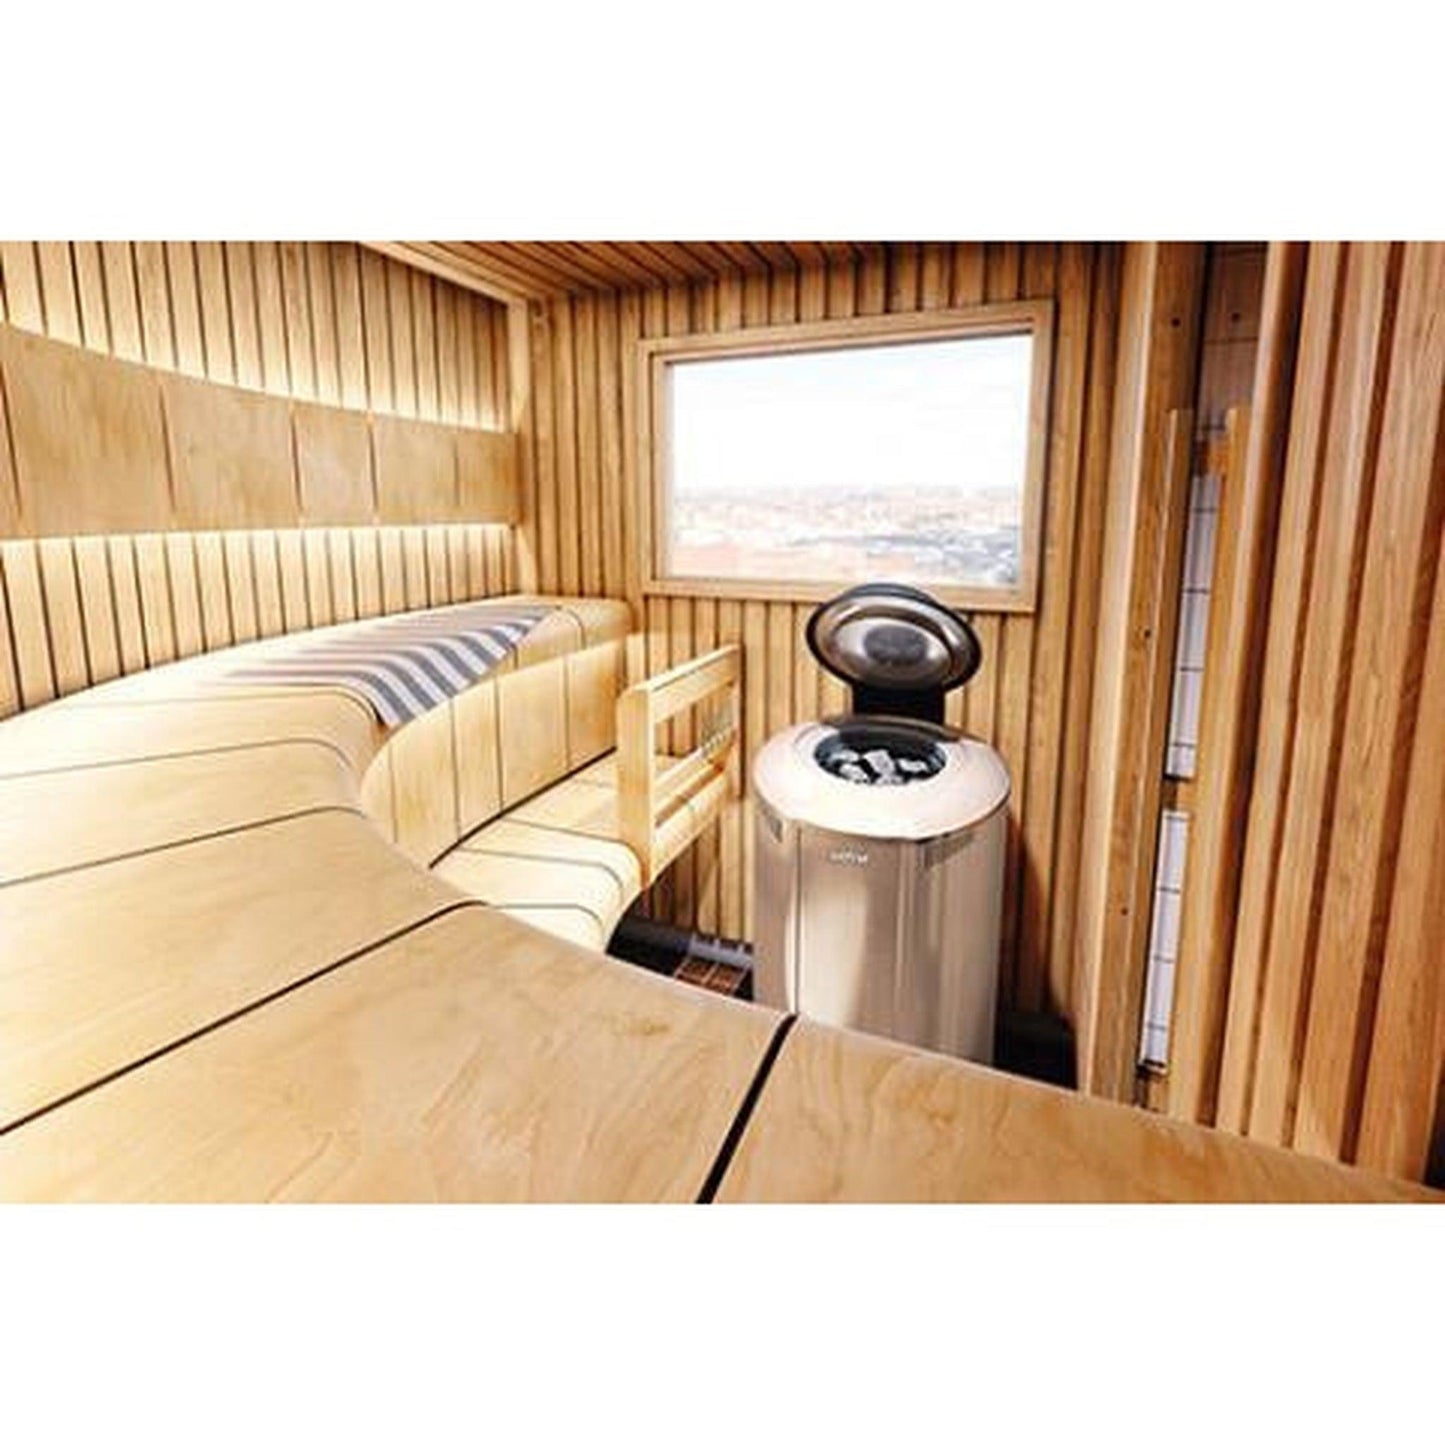 Harvia Forte 6.5 kW 240V 1PH Stainless Steel Sauna Heater With Digital Control Panel